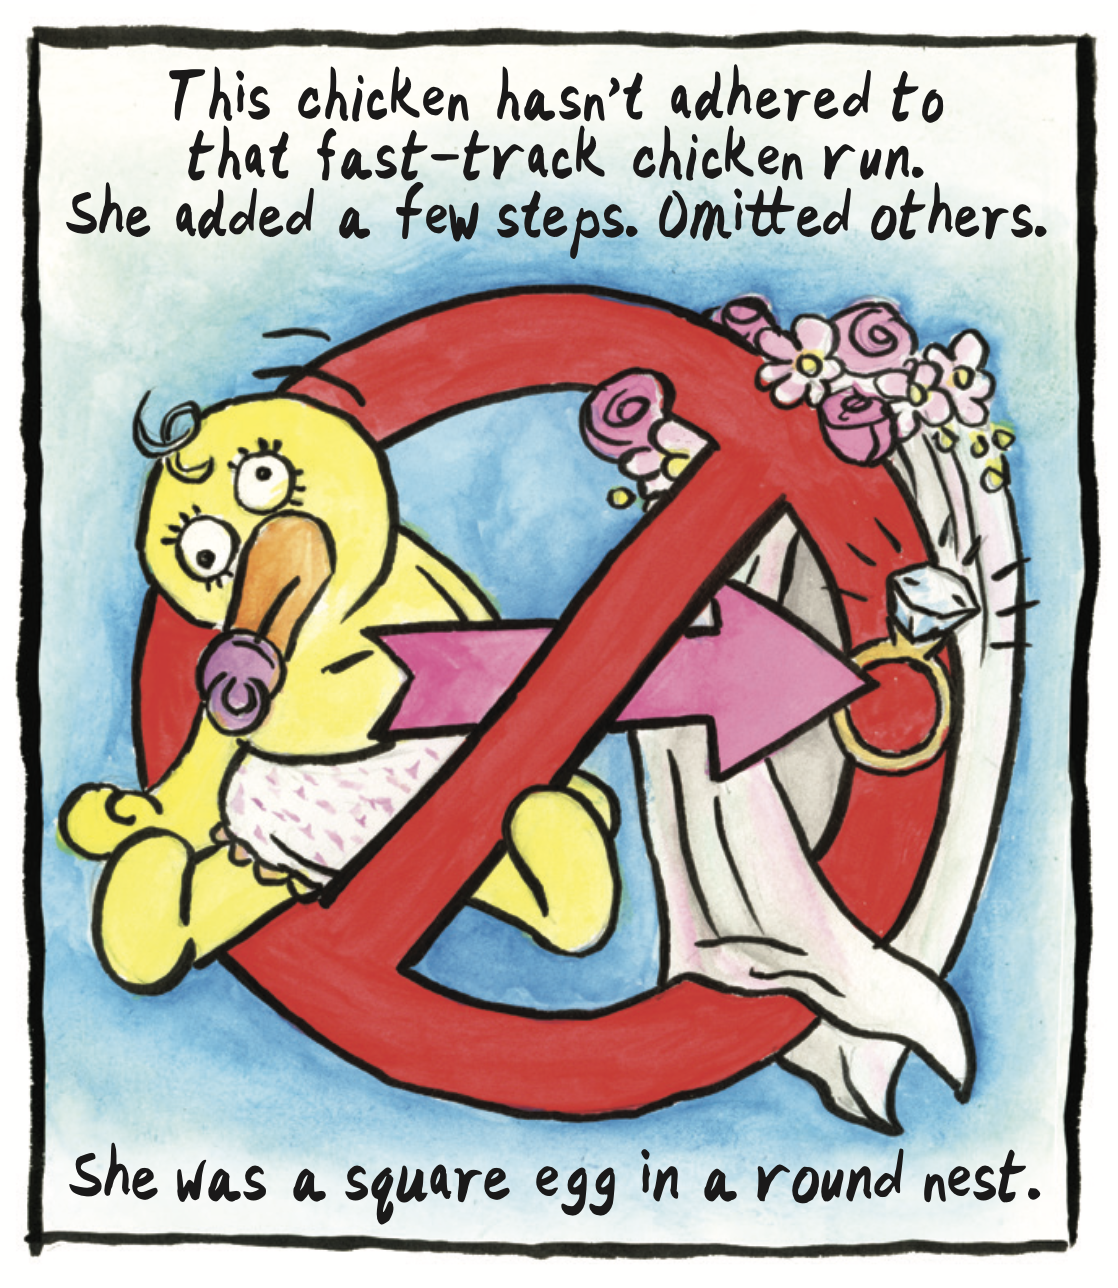 â€œThis chicken hasnâ€™t adhered to that fast-track chicken run. She added a few steps. Omitted others. She was a square egg in a round nest.â€ A red no symbol containing a chick doll with a pacifier and a diamond ring with a bouquet of flowers.